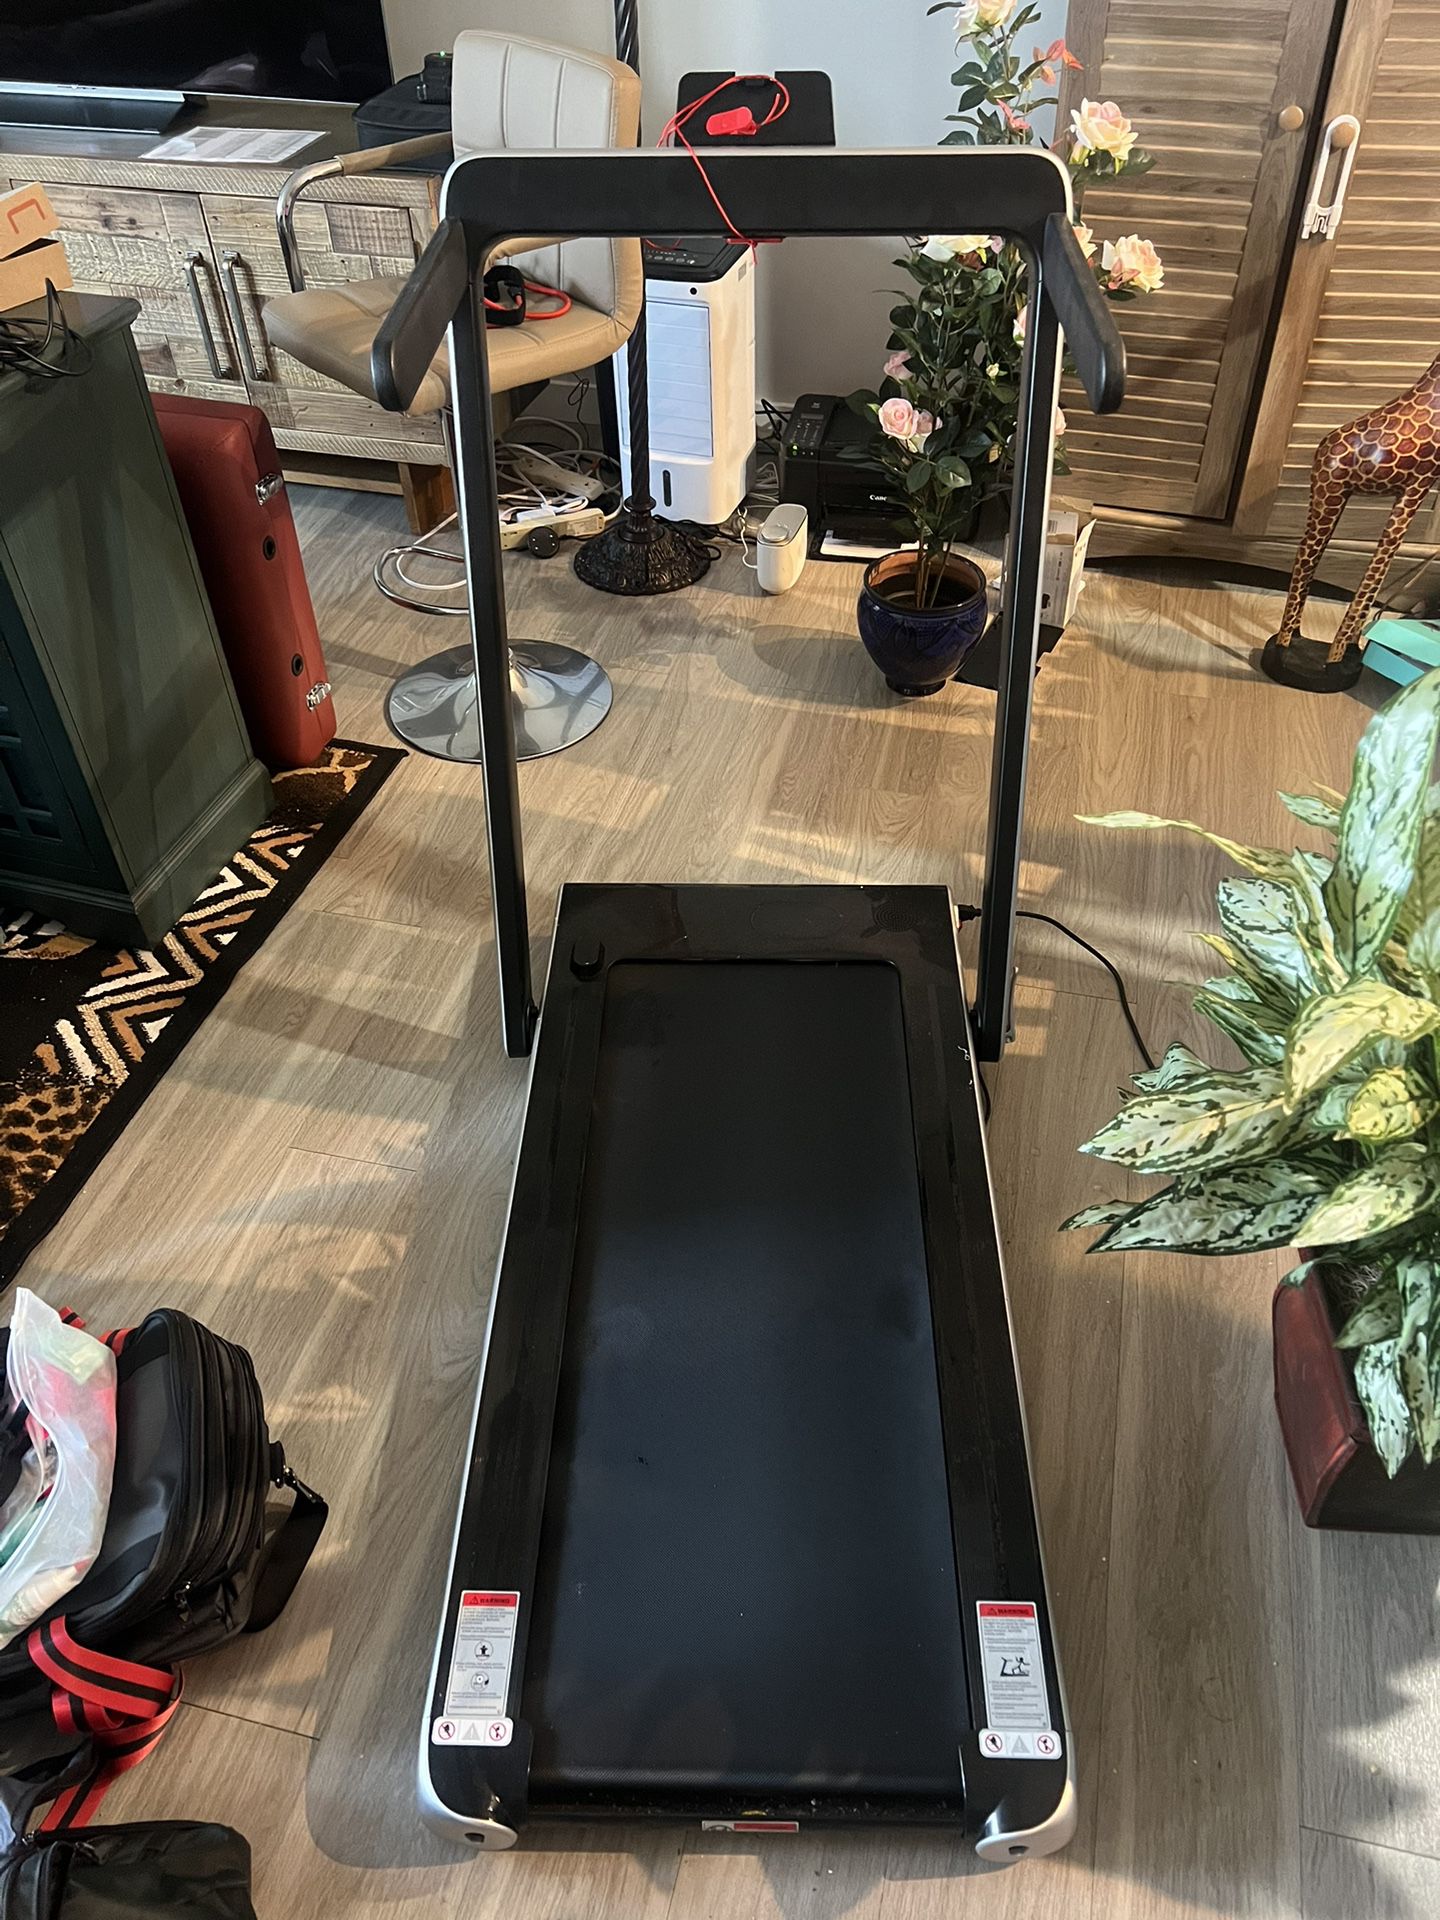 Treadmill Collapsible Foldable